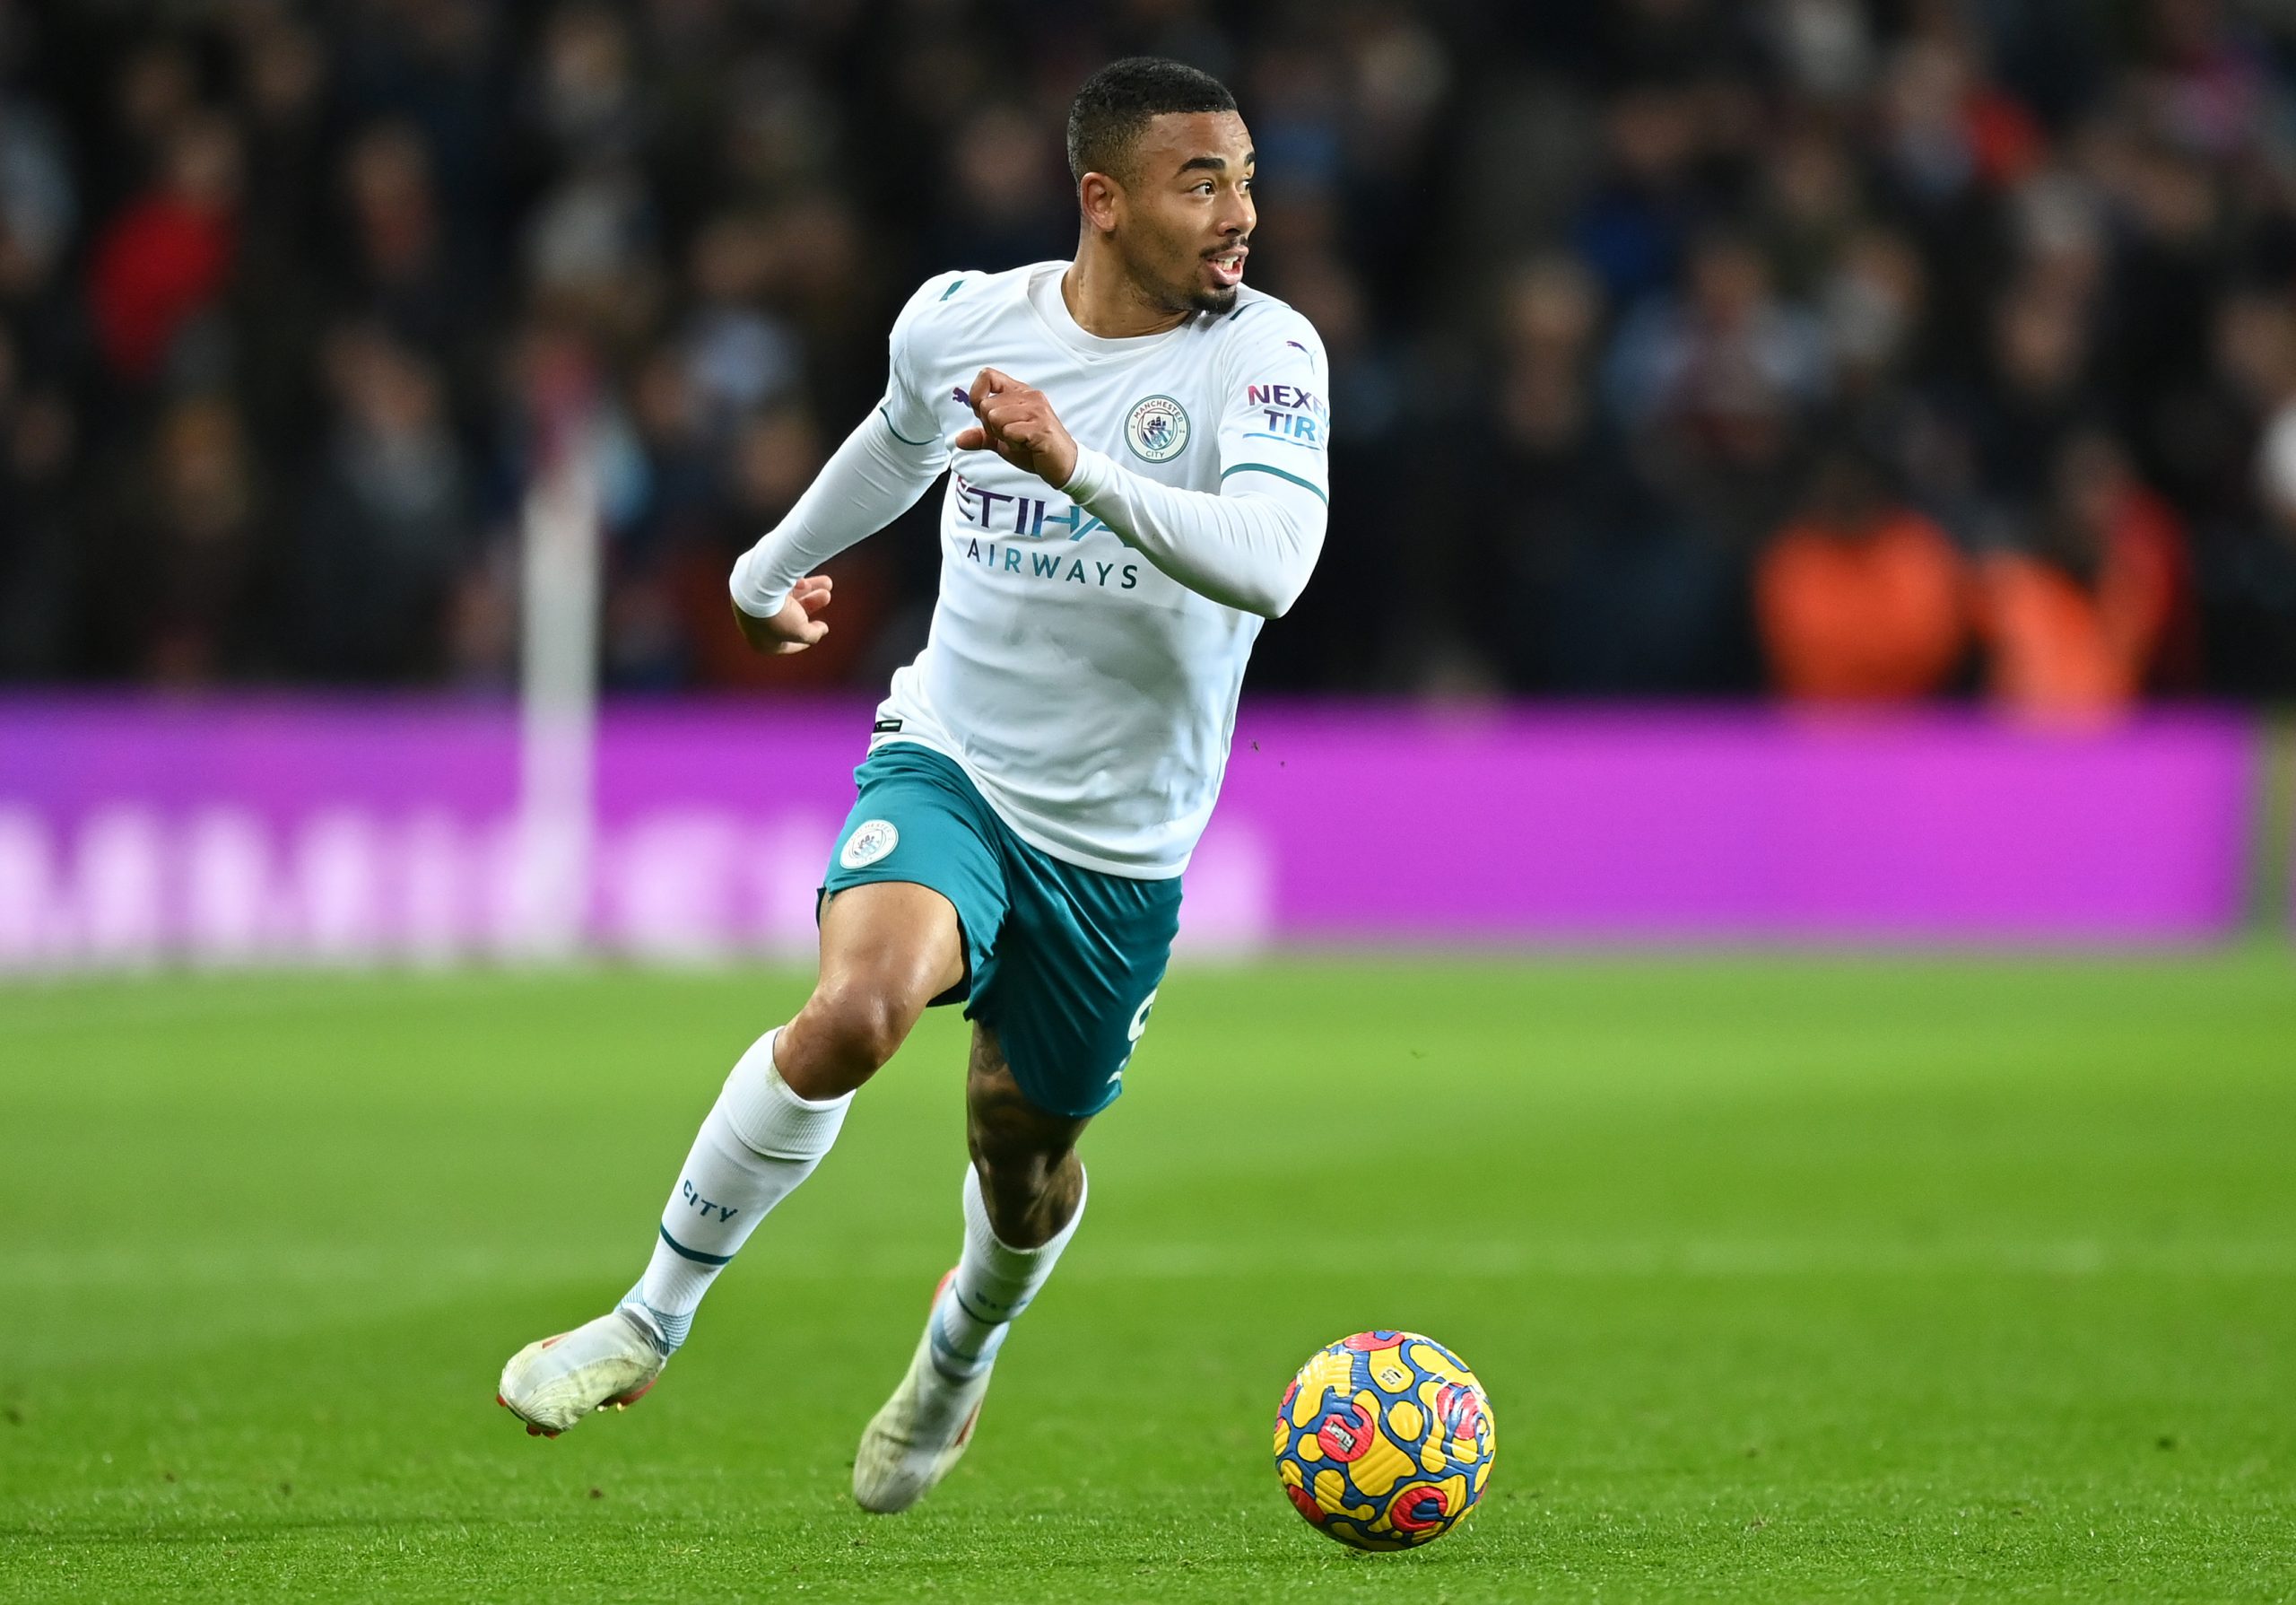 Tottenham chasing Gabriel Jesus while keeping a low profile. (Photo by Shaun Botterill/Getty Images)